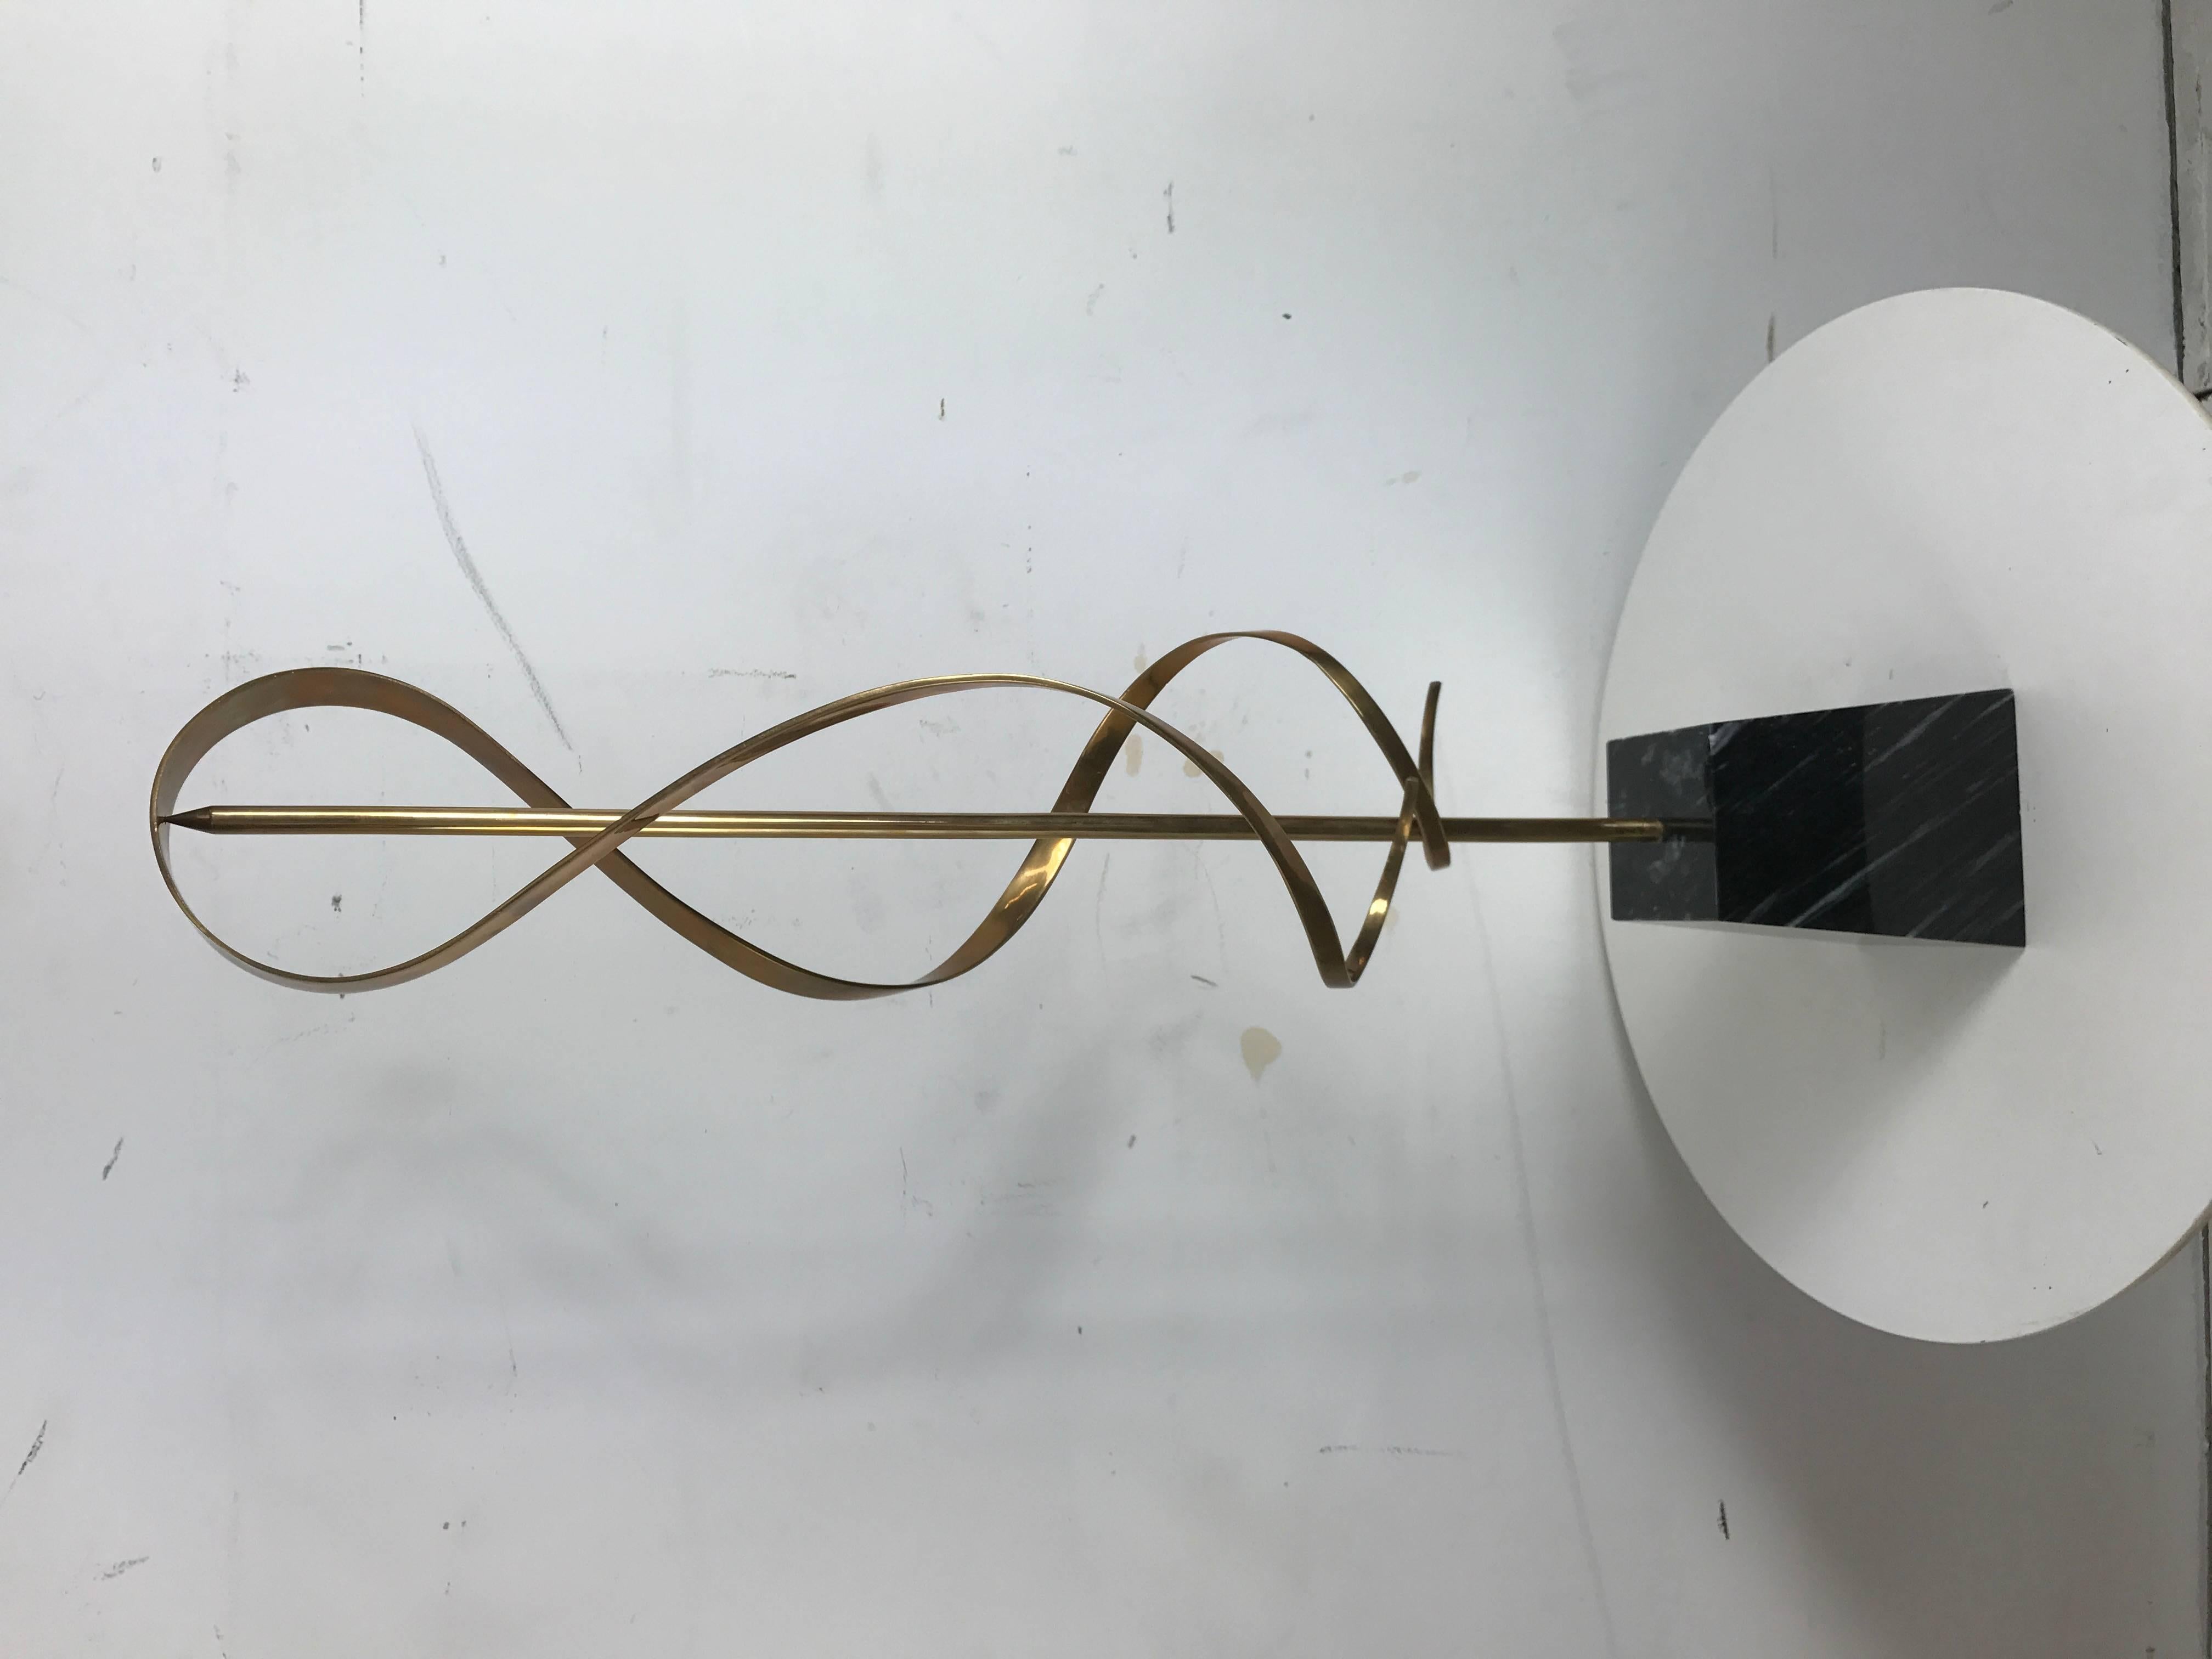 Brass and marble Kinetic sculpture, USA, 1970s by American jewelry designer and sculpture Russell Secrest, 1935-2010.